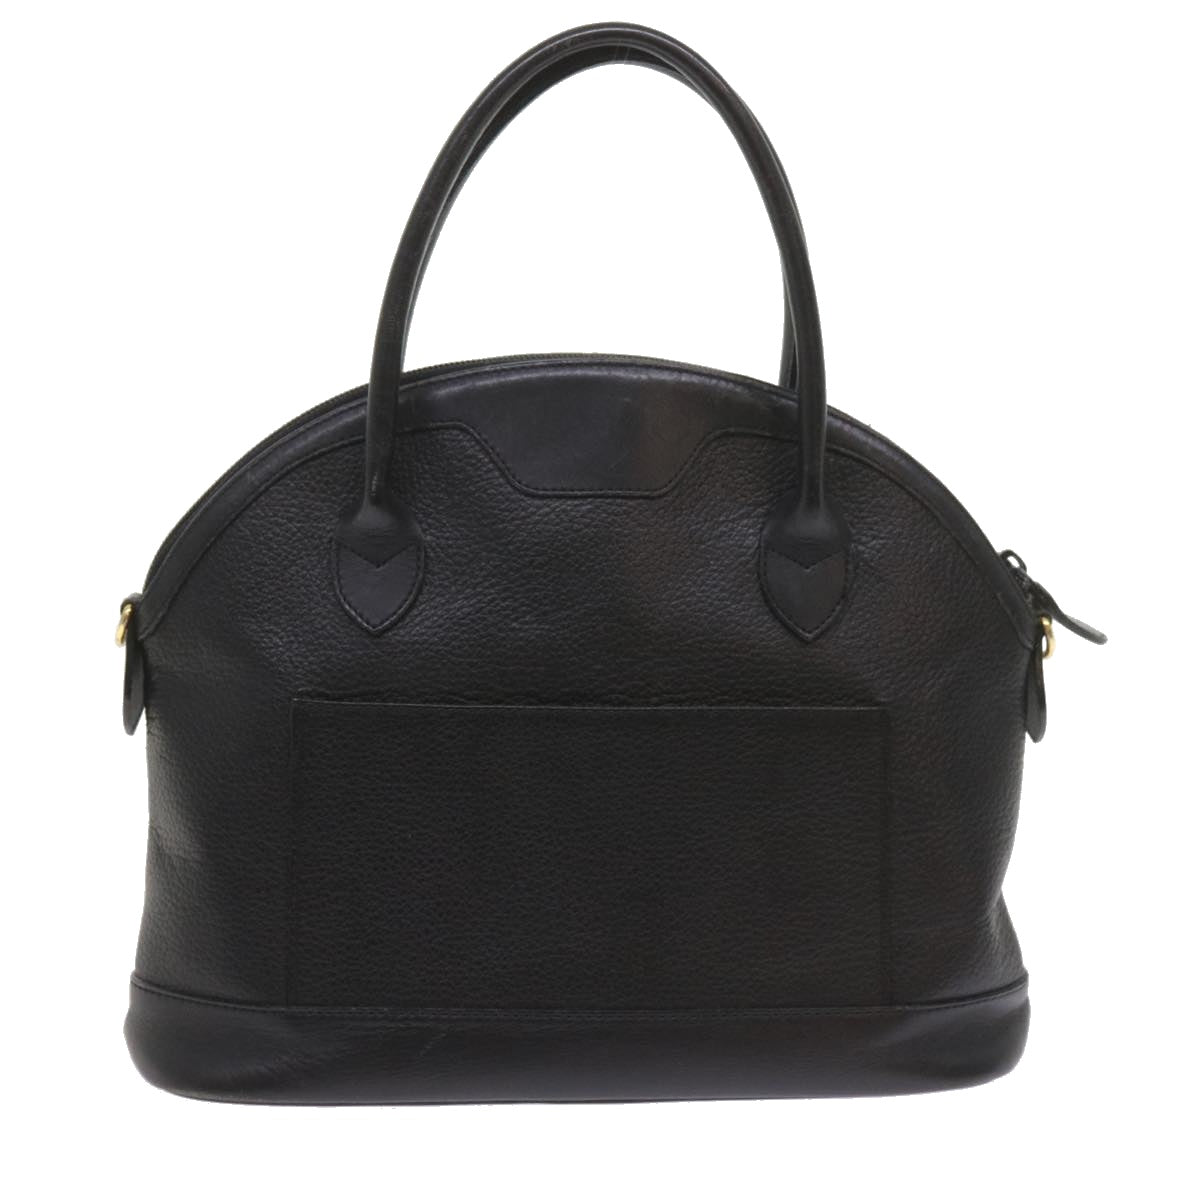 Burberrys Hand Bag Leather Black Auth ep2485 - 0